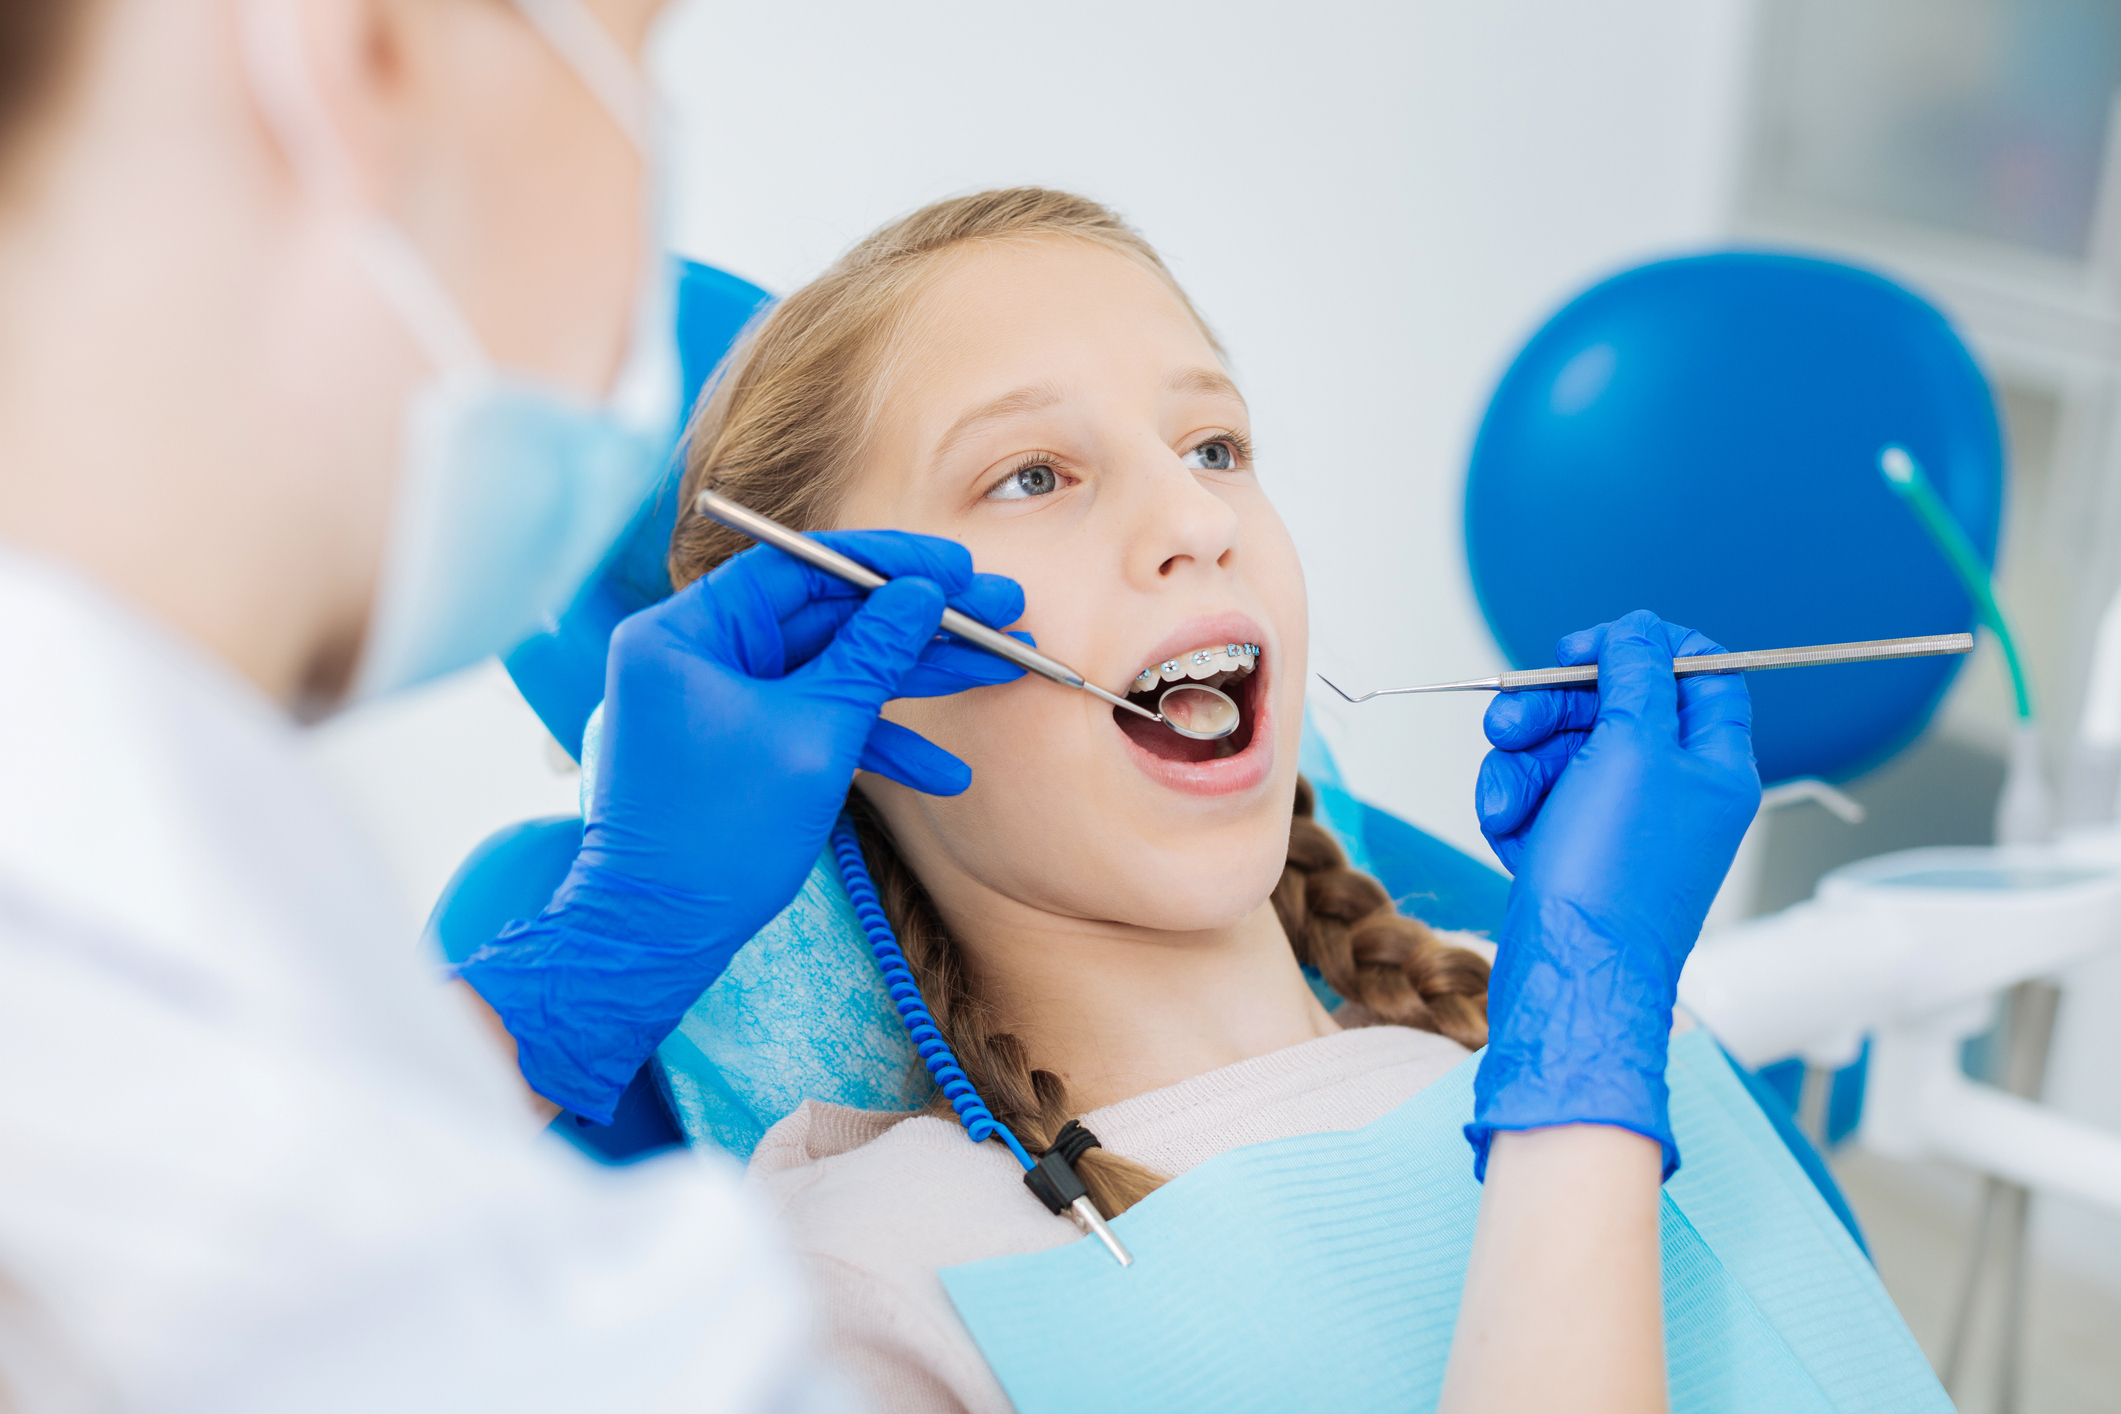 Young girl having a dental checkup with a dentist using tools. She looks calm. The setting suggests routine oral care